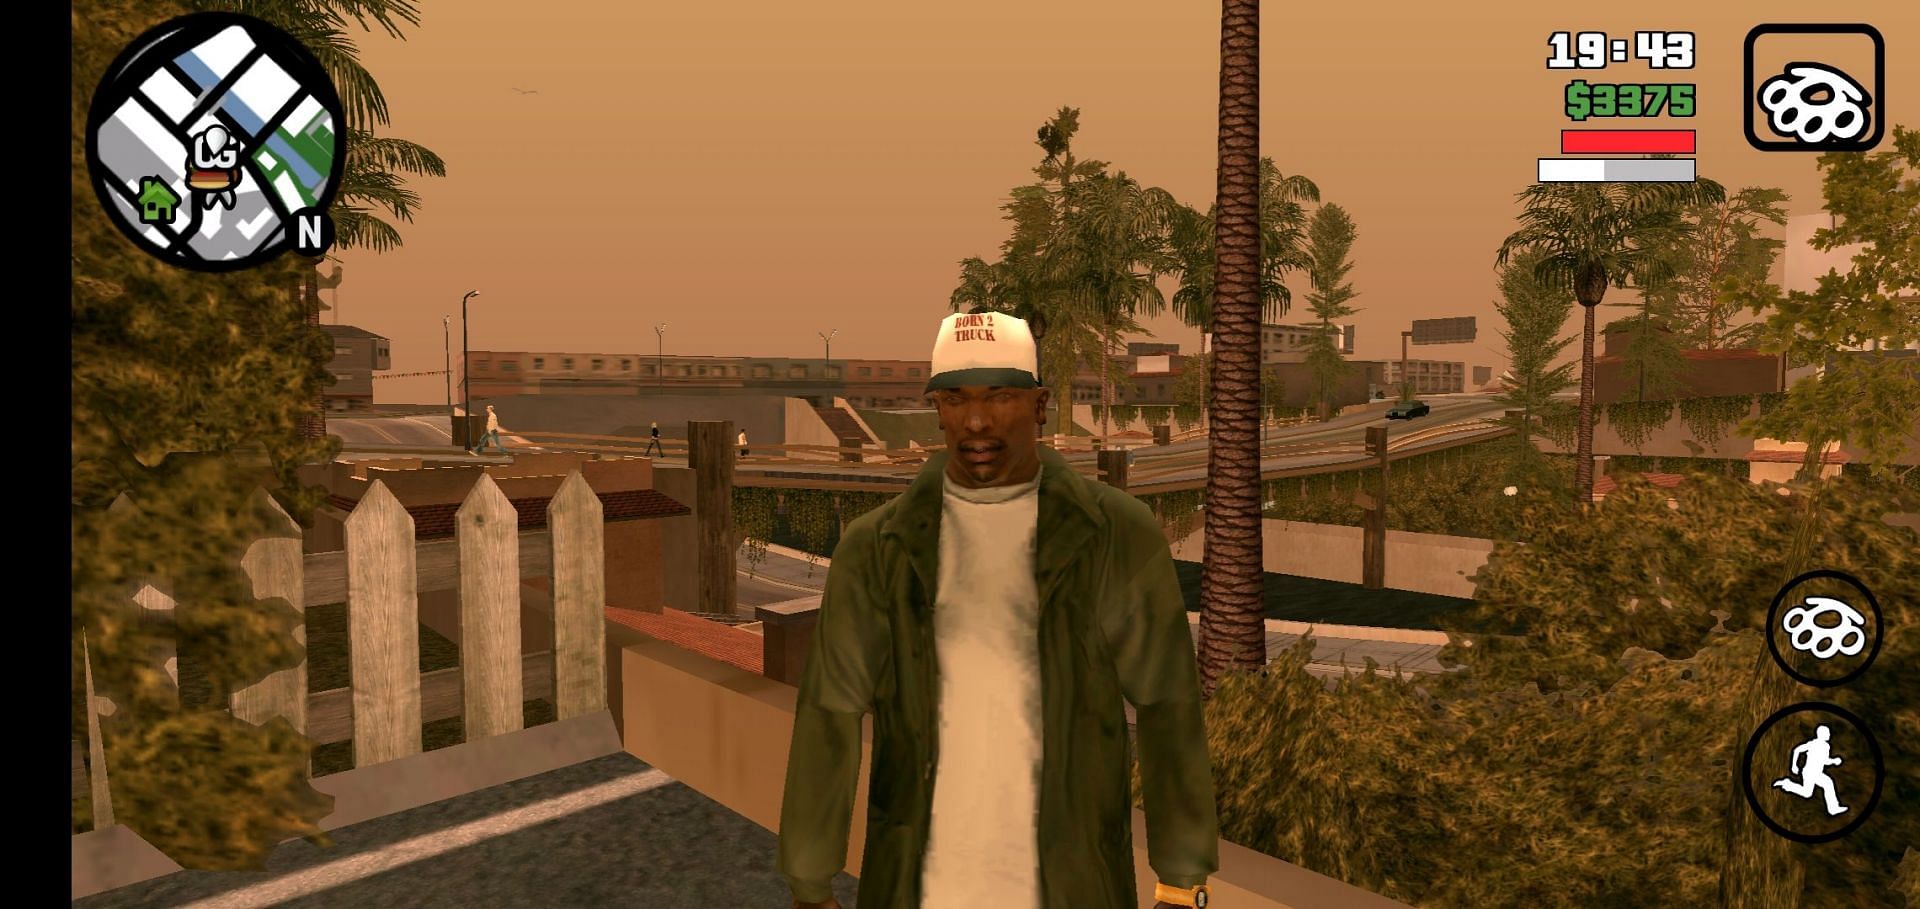 GTA San Andreas plays well on Android devices, for example (Image via Rockstar Games)